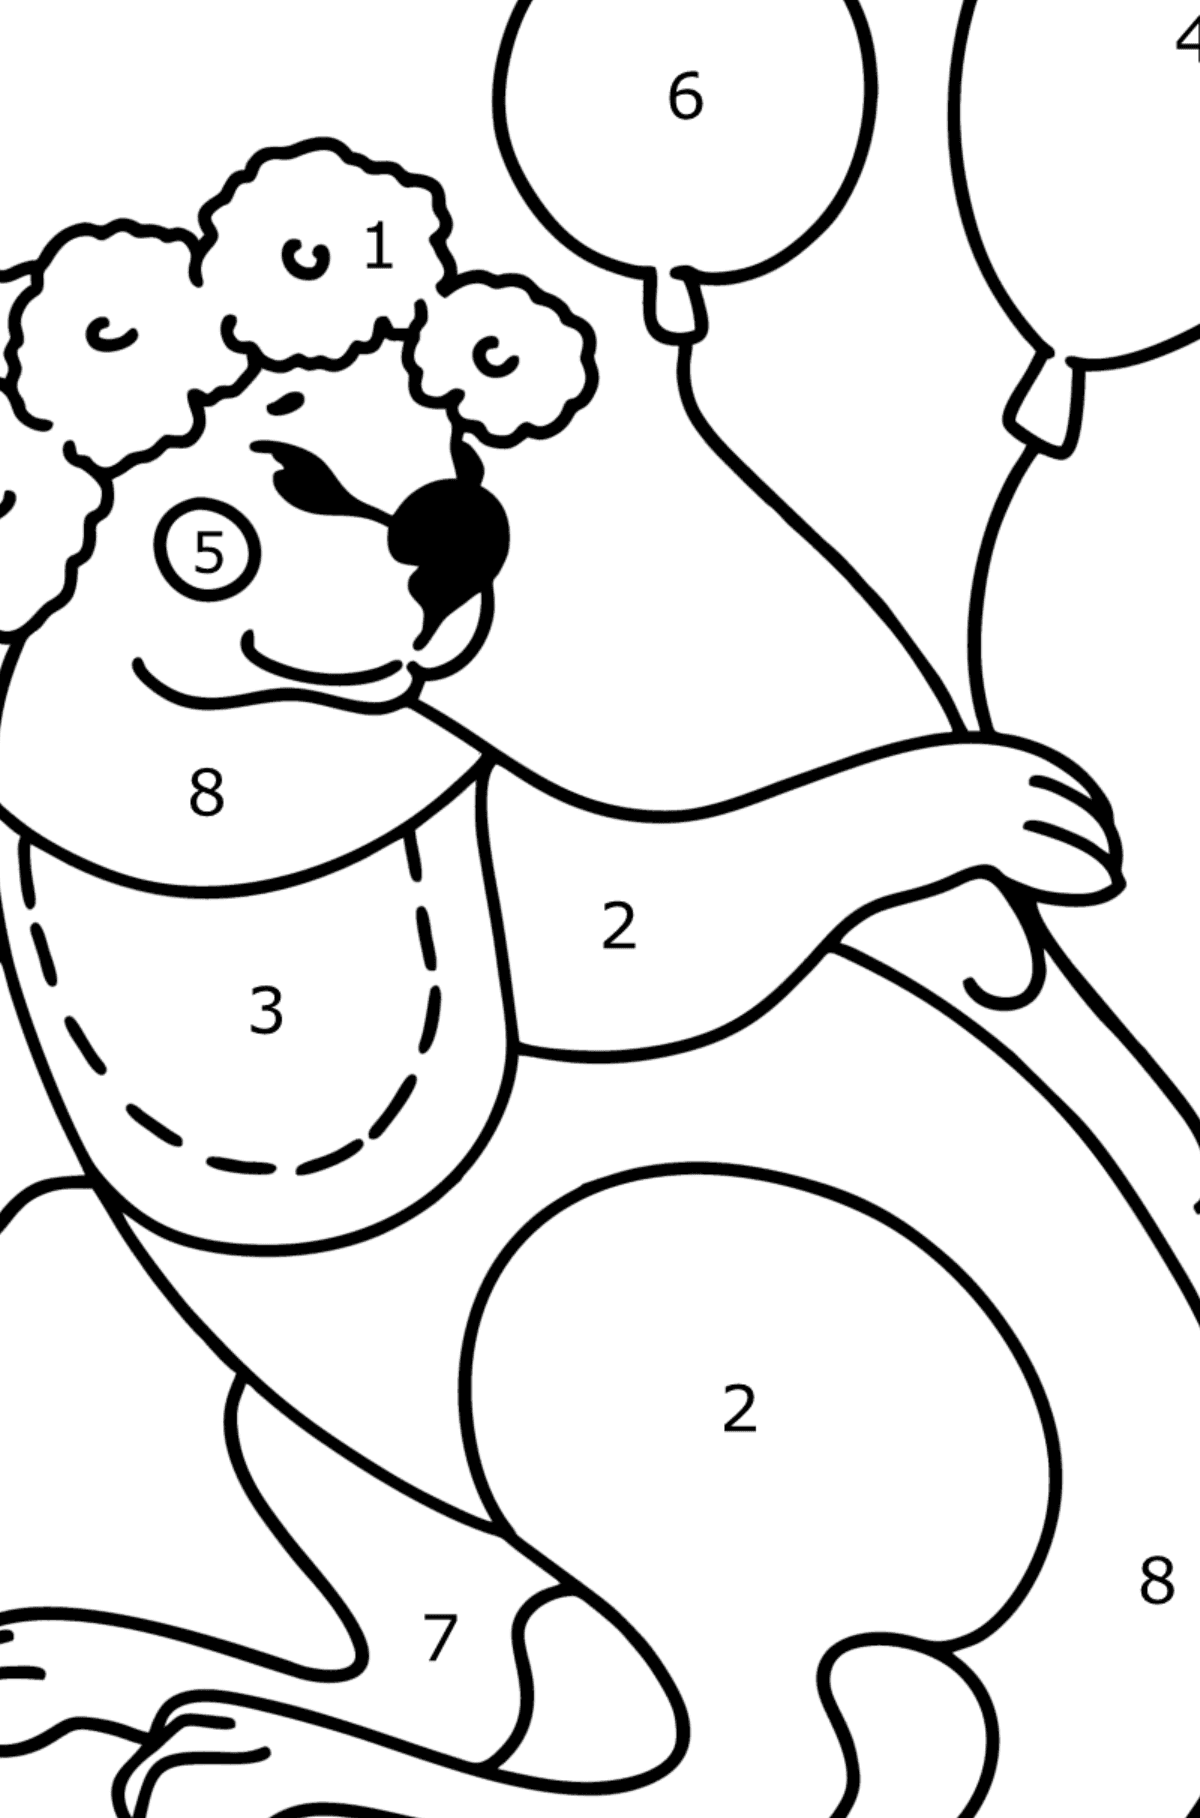 Beautiful Coloring page - Cartoon Baby Kangaroo - Coloring by Numbers for Kids